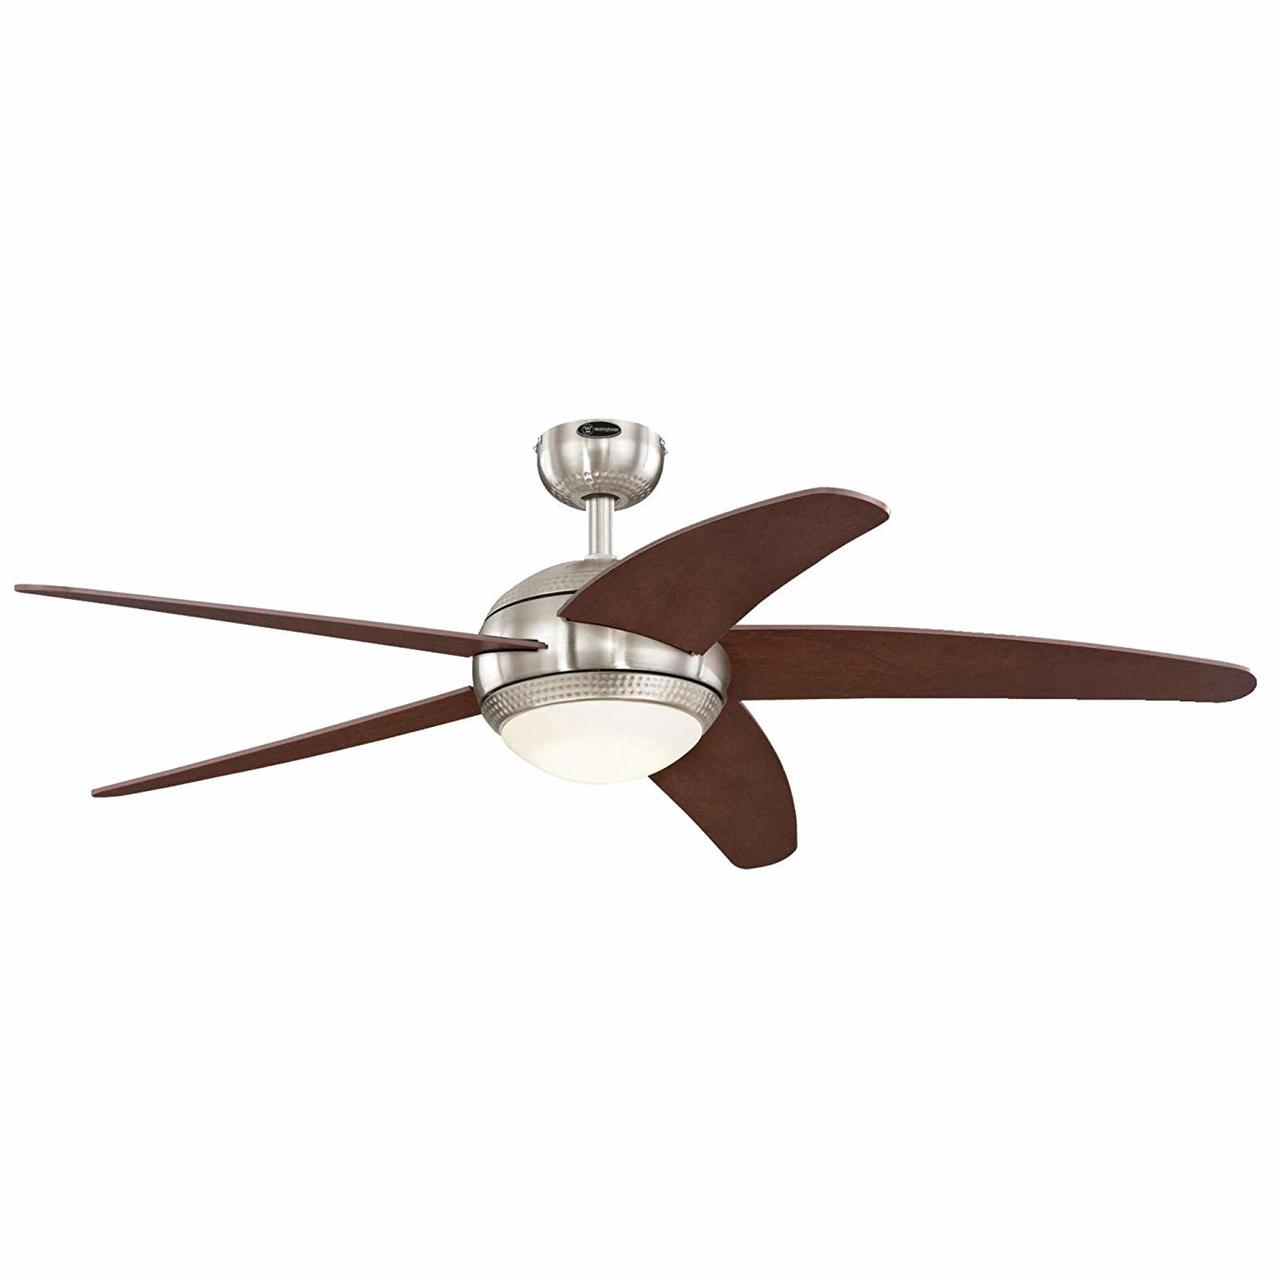 Westinghouse 7206500 Bendan LED 52-inch Brushed Nickel with Hammered Accents Indoor Ceiling Fan, Dimmable LED Light Kit with Opal Frosted Glass, Remote Control Included